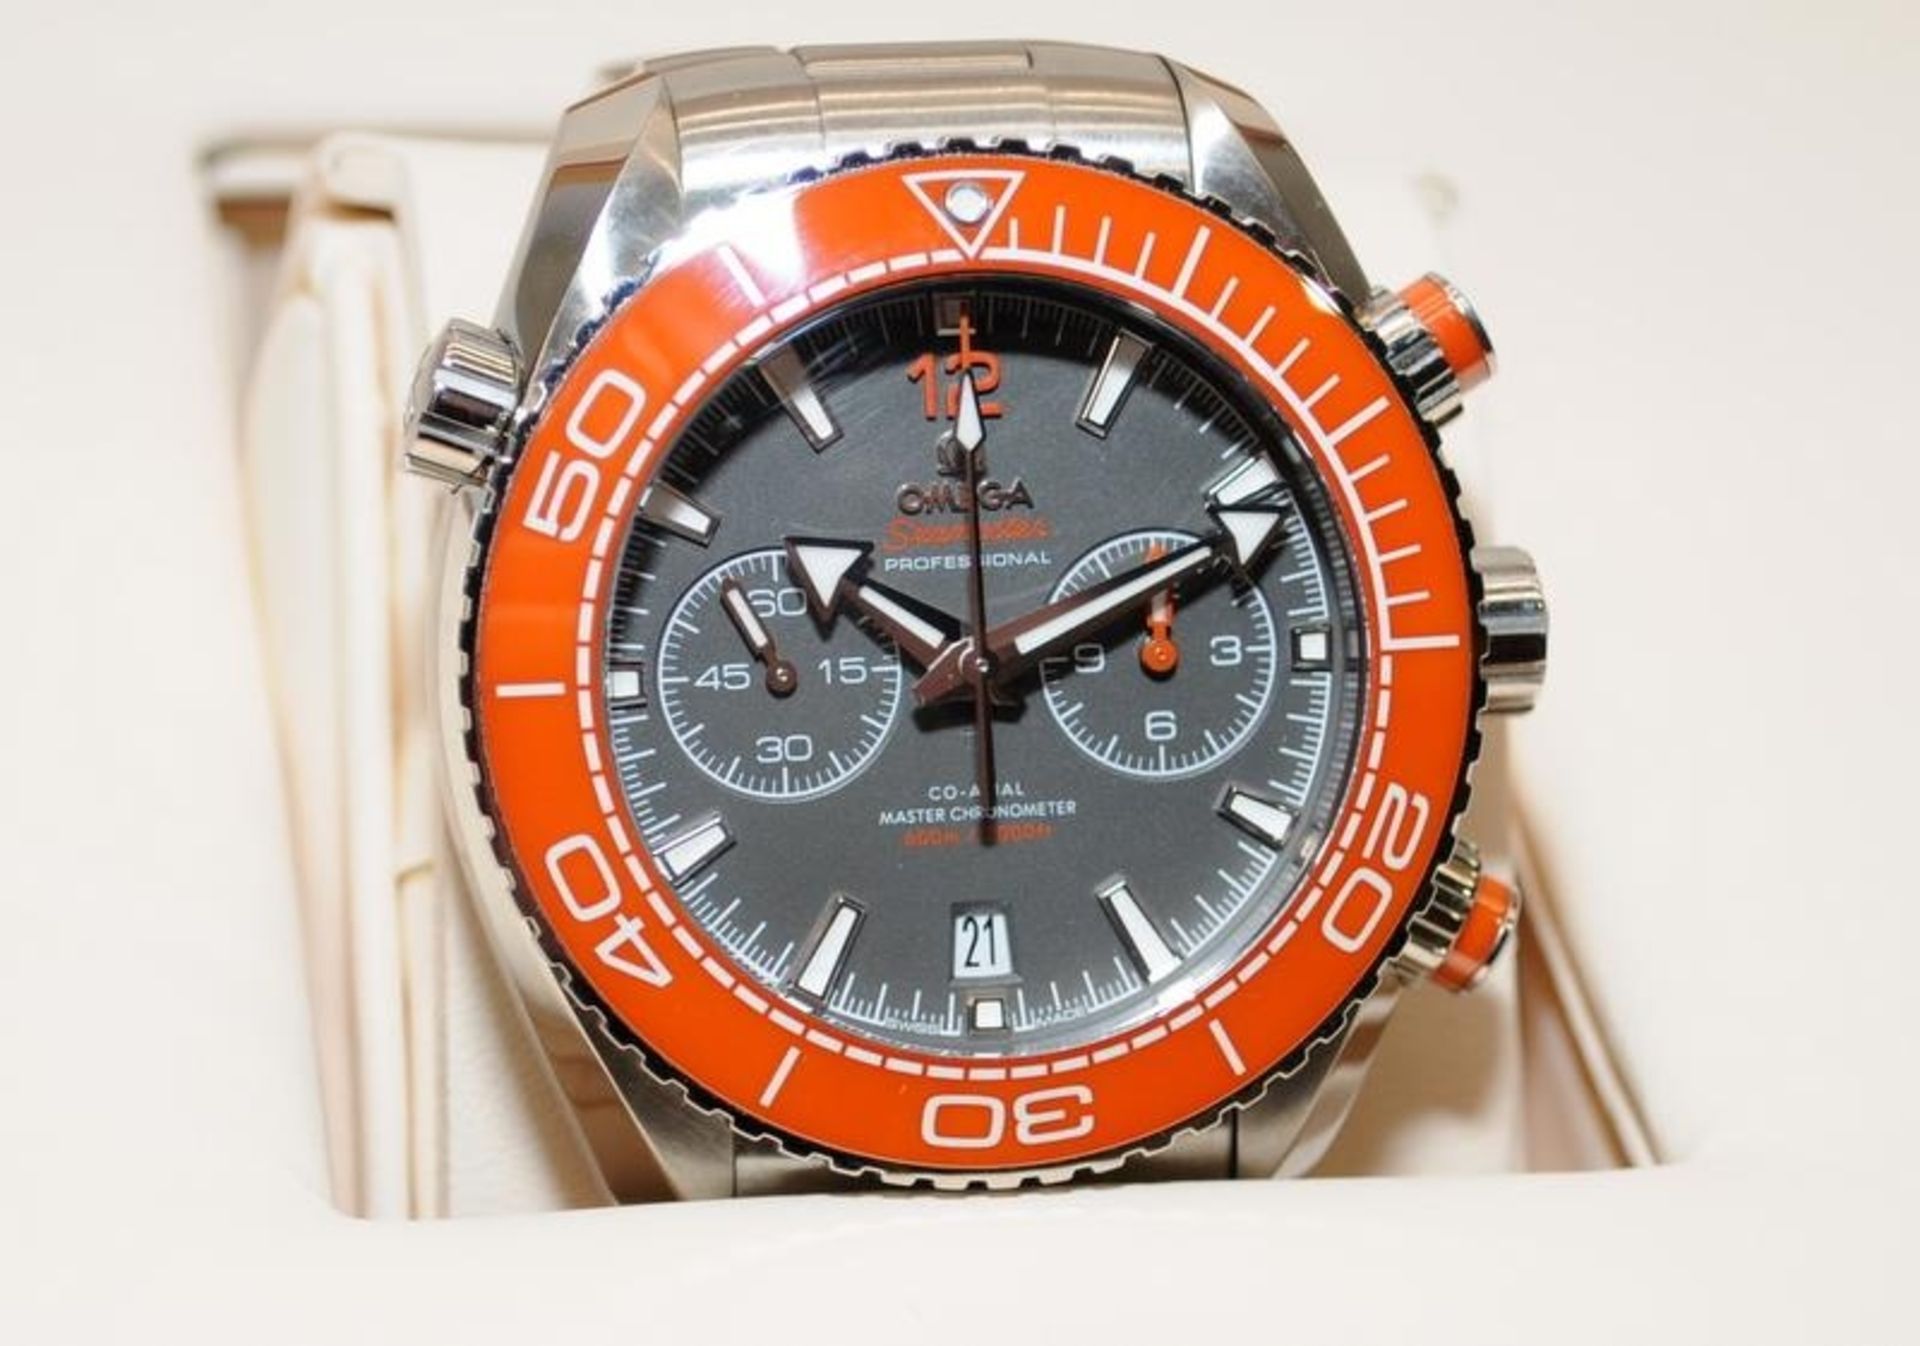 Omega Seamaster Planet Ocean, grey dial/orange bezel variant. Comes complete with papers, inner - Image 4 of 10